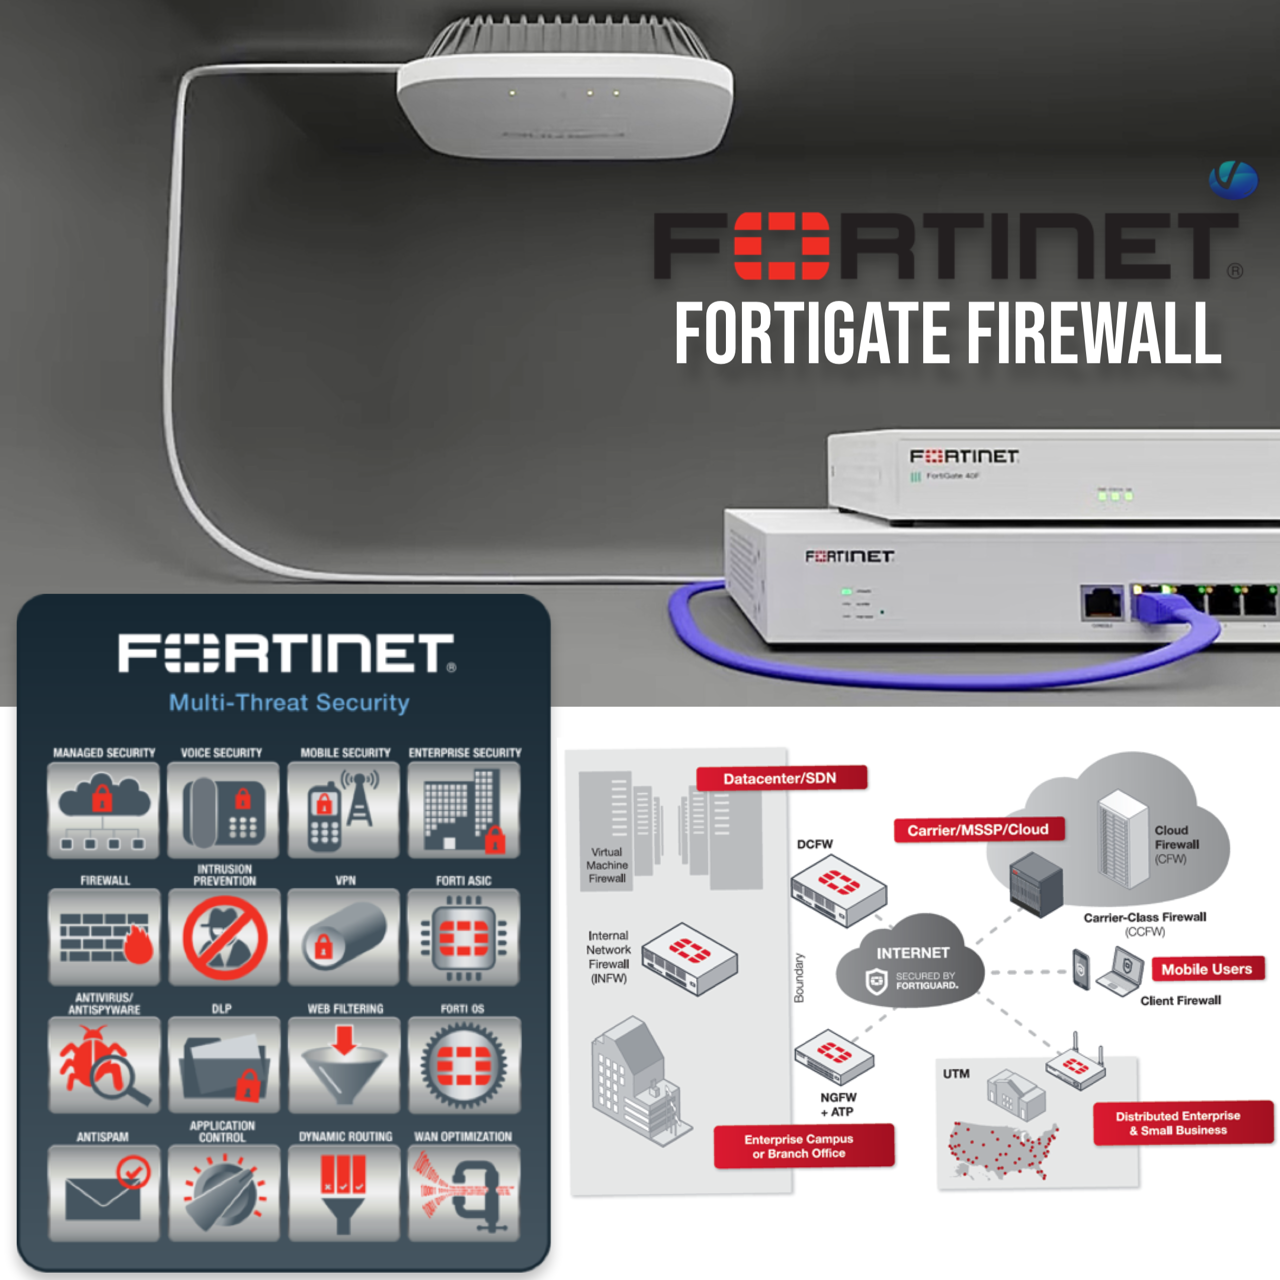 The Fortinet Firewall